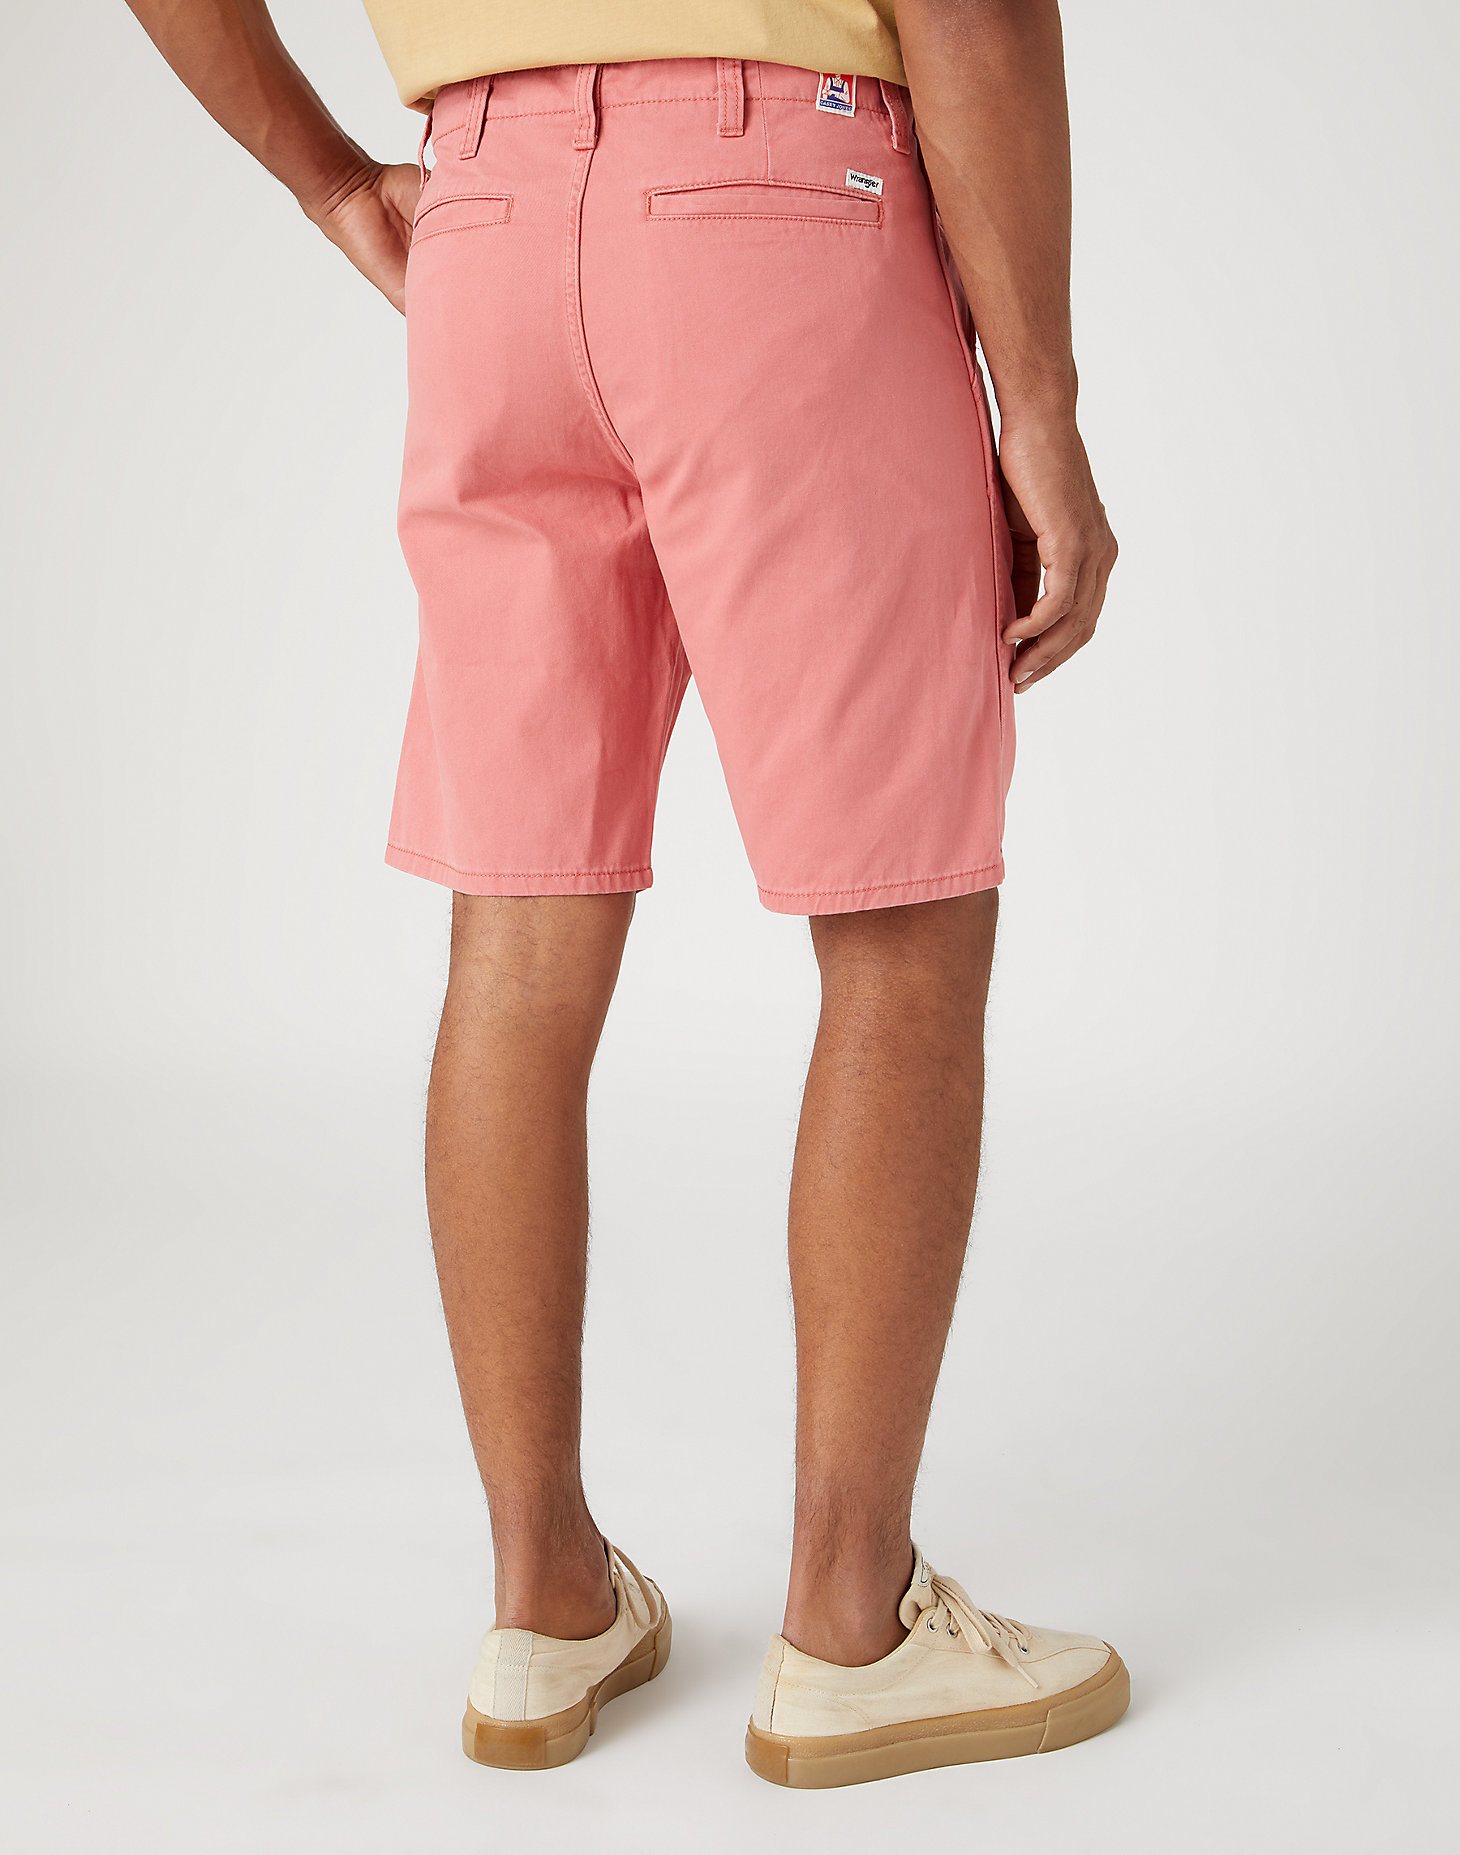 Casey Chino Shorts in Faded Rose alternative view 2